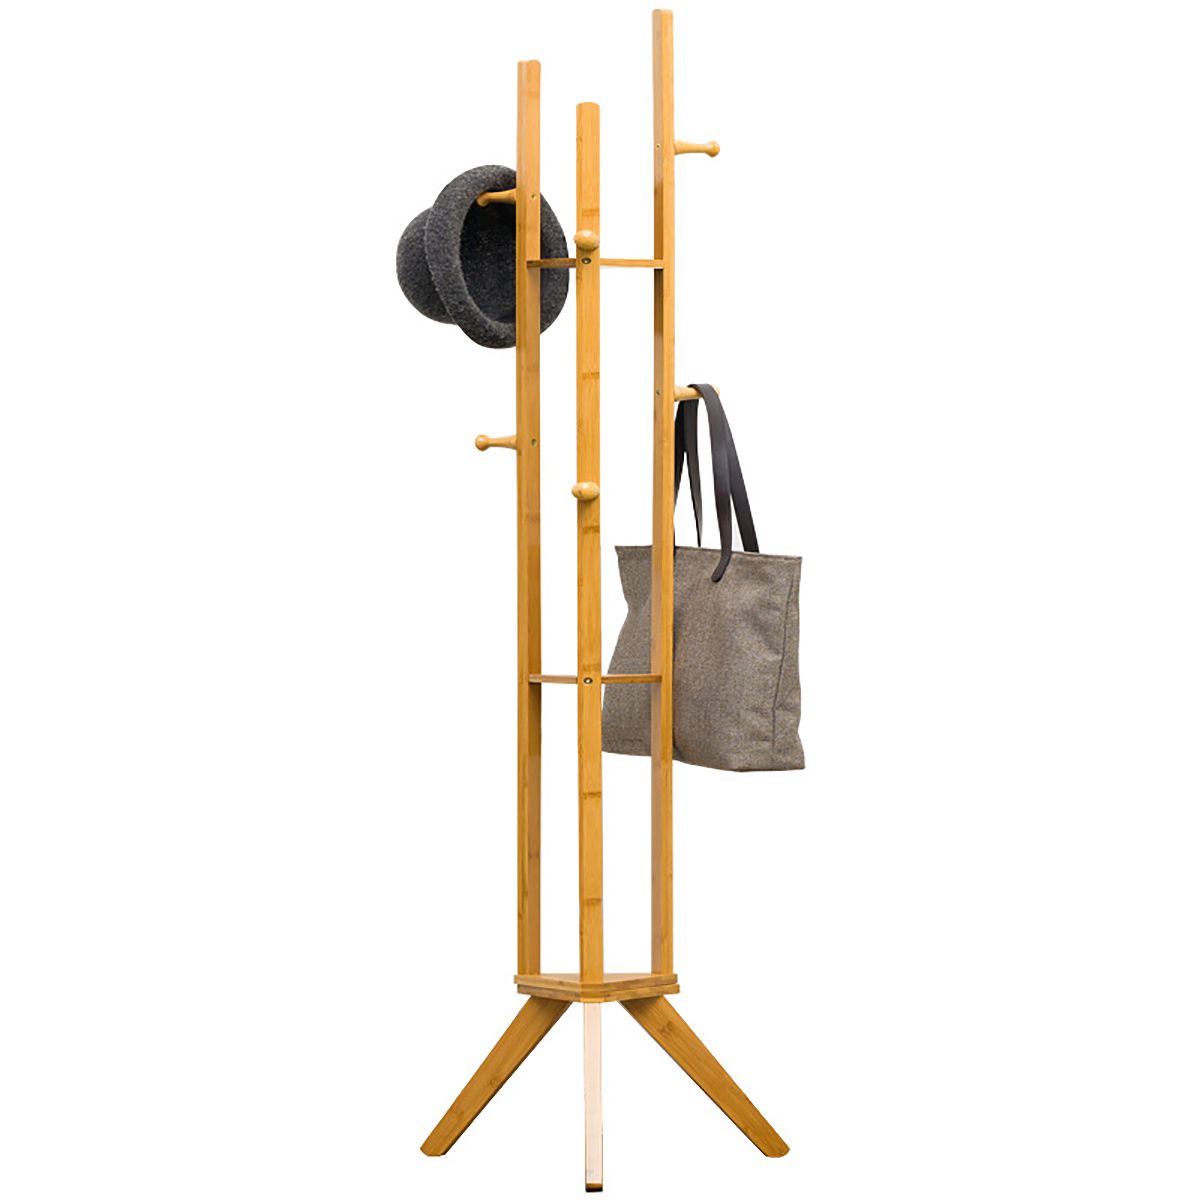 Coat-Rack-Stand-Coat-Tree-Cloth-Hanger-Hall-Tree-Free-Standing-Farmhouse-Style-Bamboo-Rack-Holder-wi-1576462